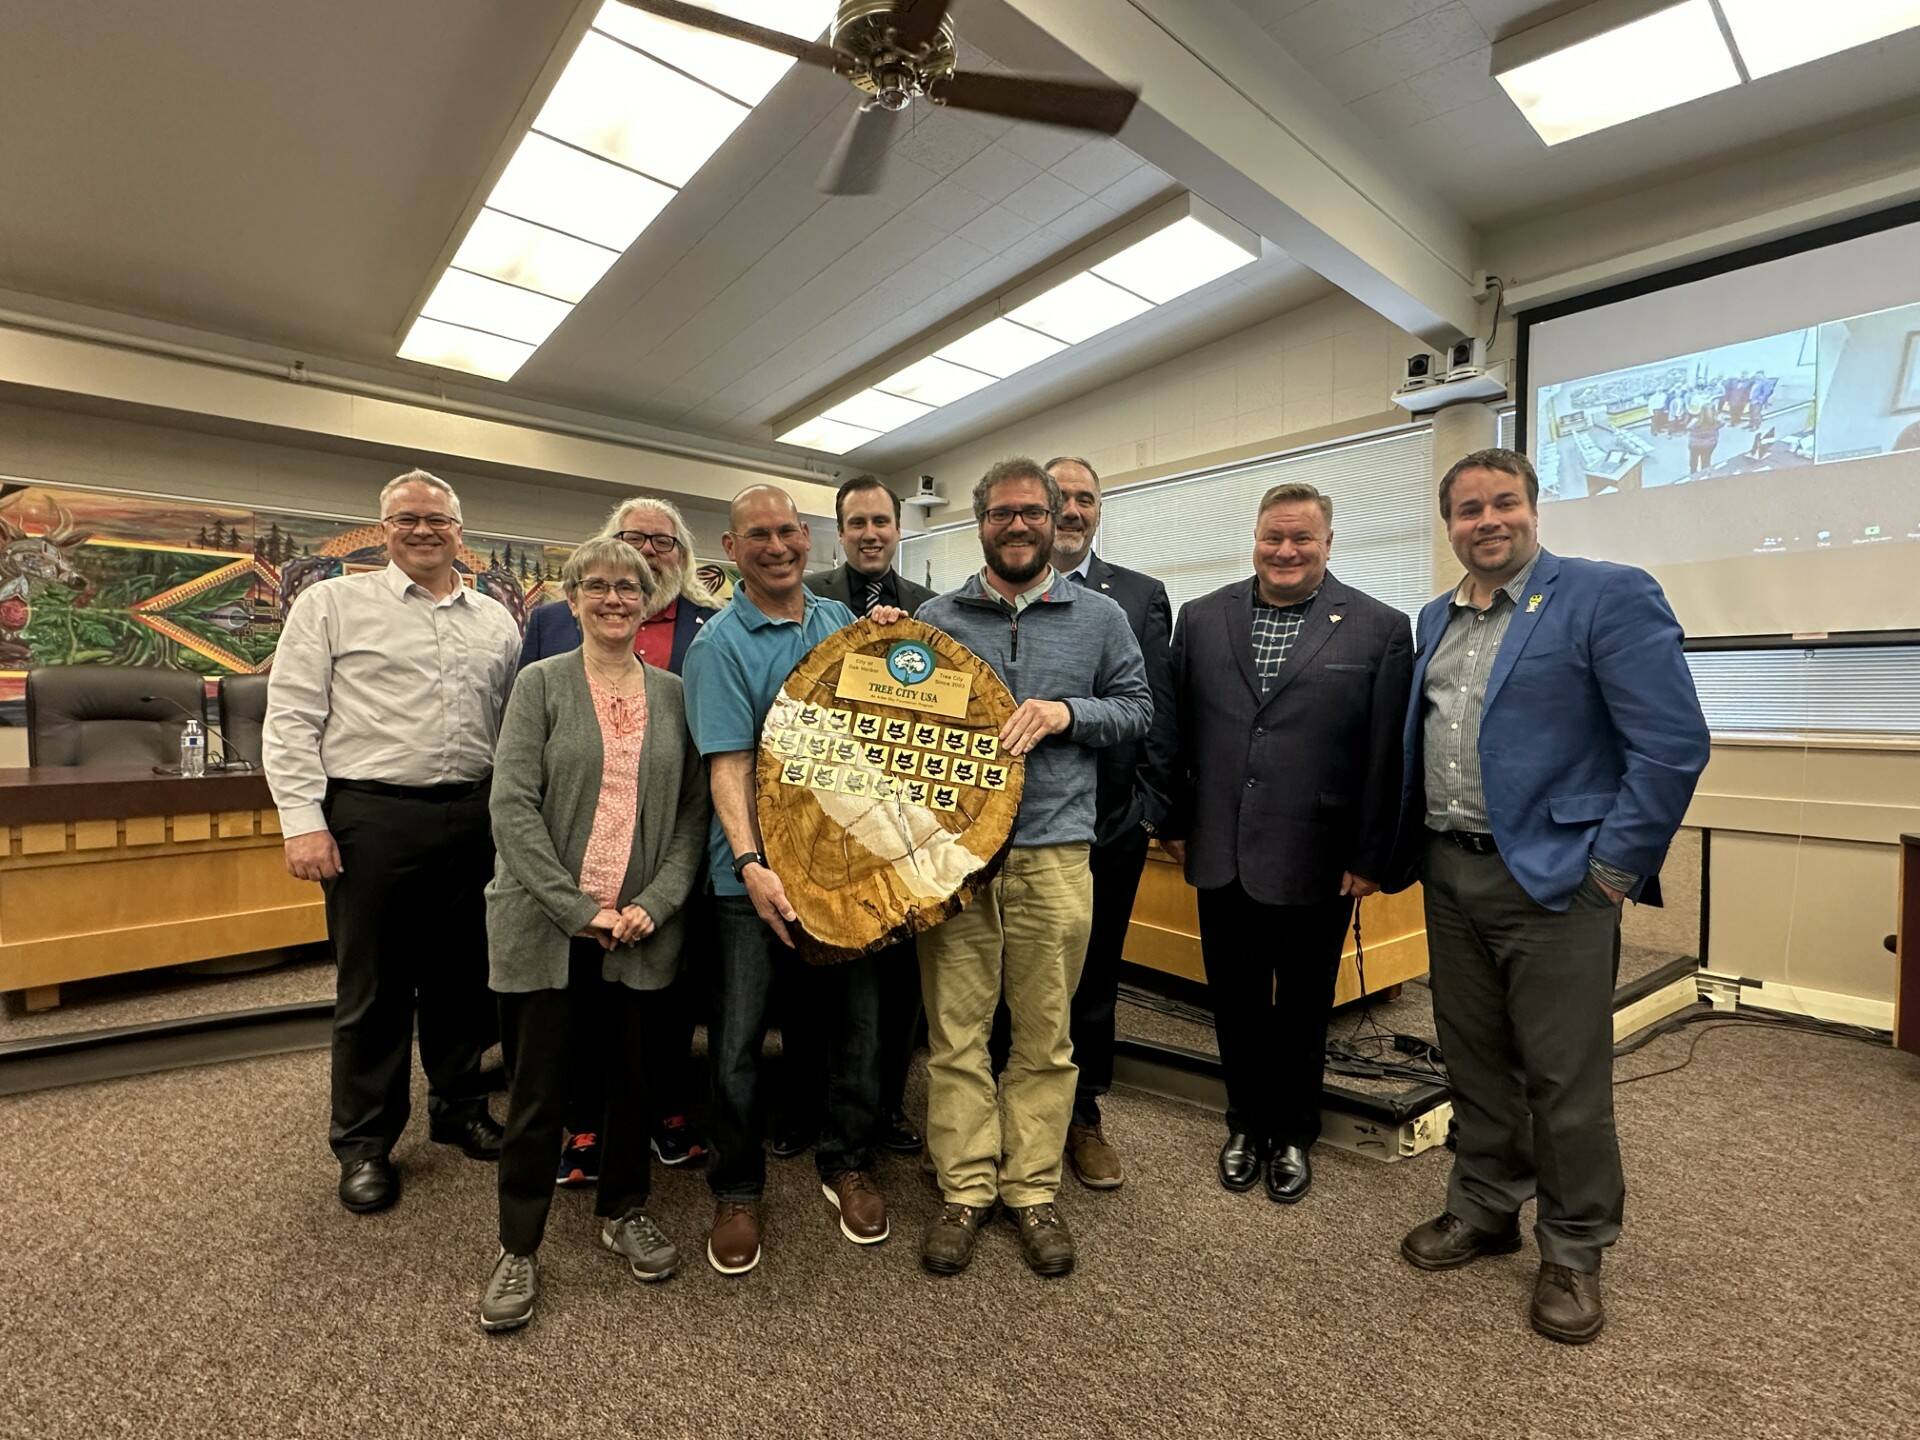 From left to right: Parks and Rec Director Brian Smith, Councilmember Barbara Armes, Councilmember Christopher Wiegenstein, Parks employee Bill Leuthe, Councilmember Bryan Stucky, Parks Supervisor Brandon Cable, Councilmember Eric Marshall, Mayor Ronnie Wright and Councilmember Shane Hoffmire present a plaque honoring the city’s 21st Tree City USA Designation at a city council meeting on Tuesday. (Photo provided)